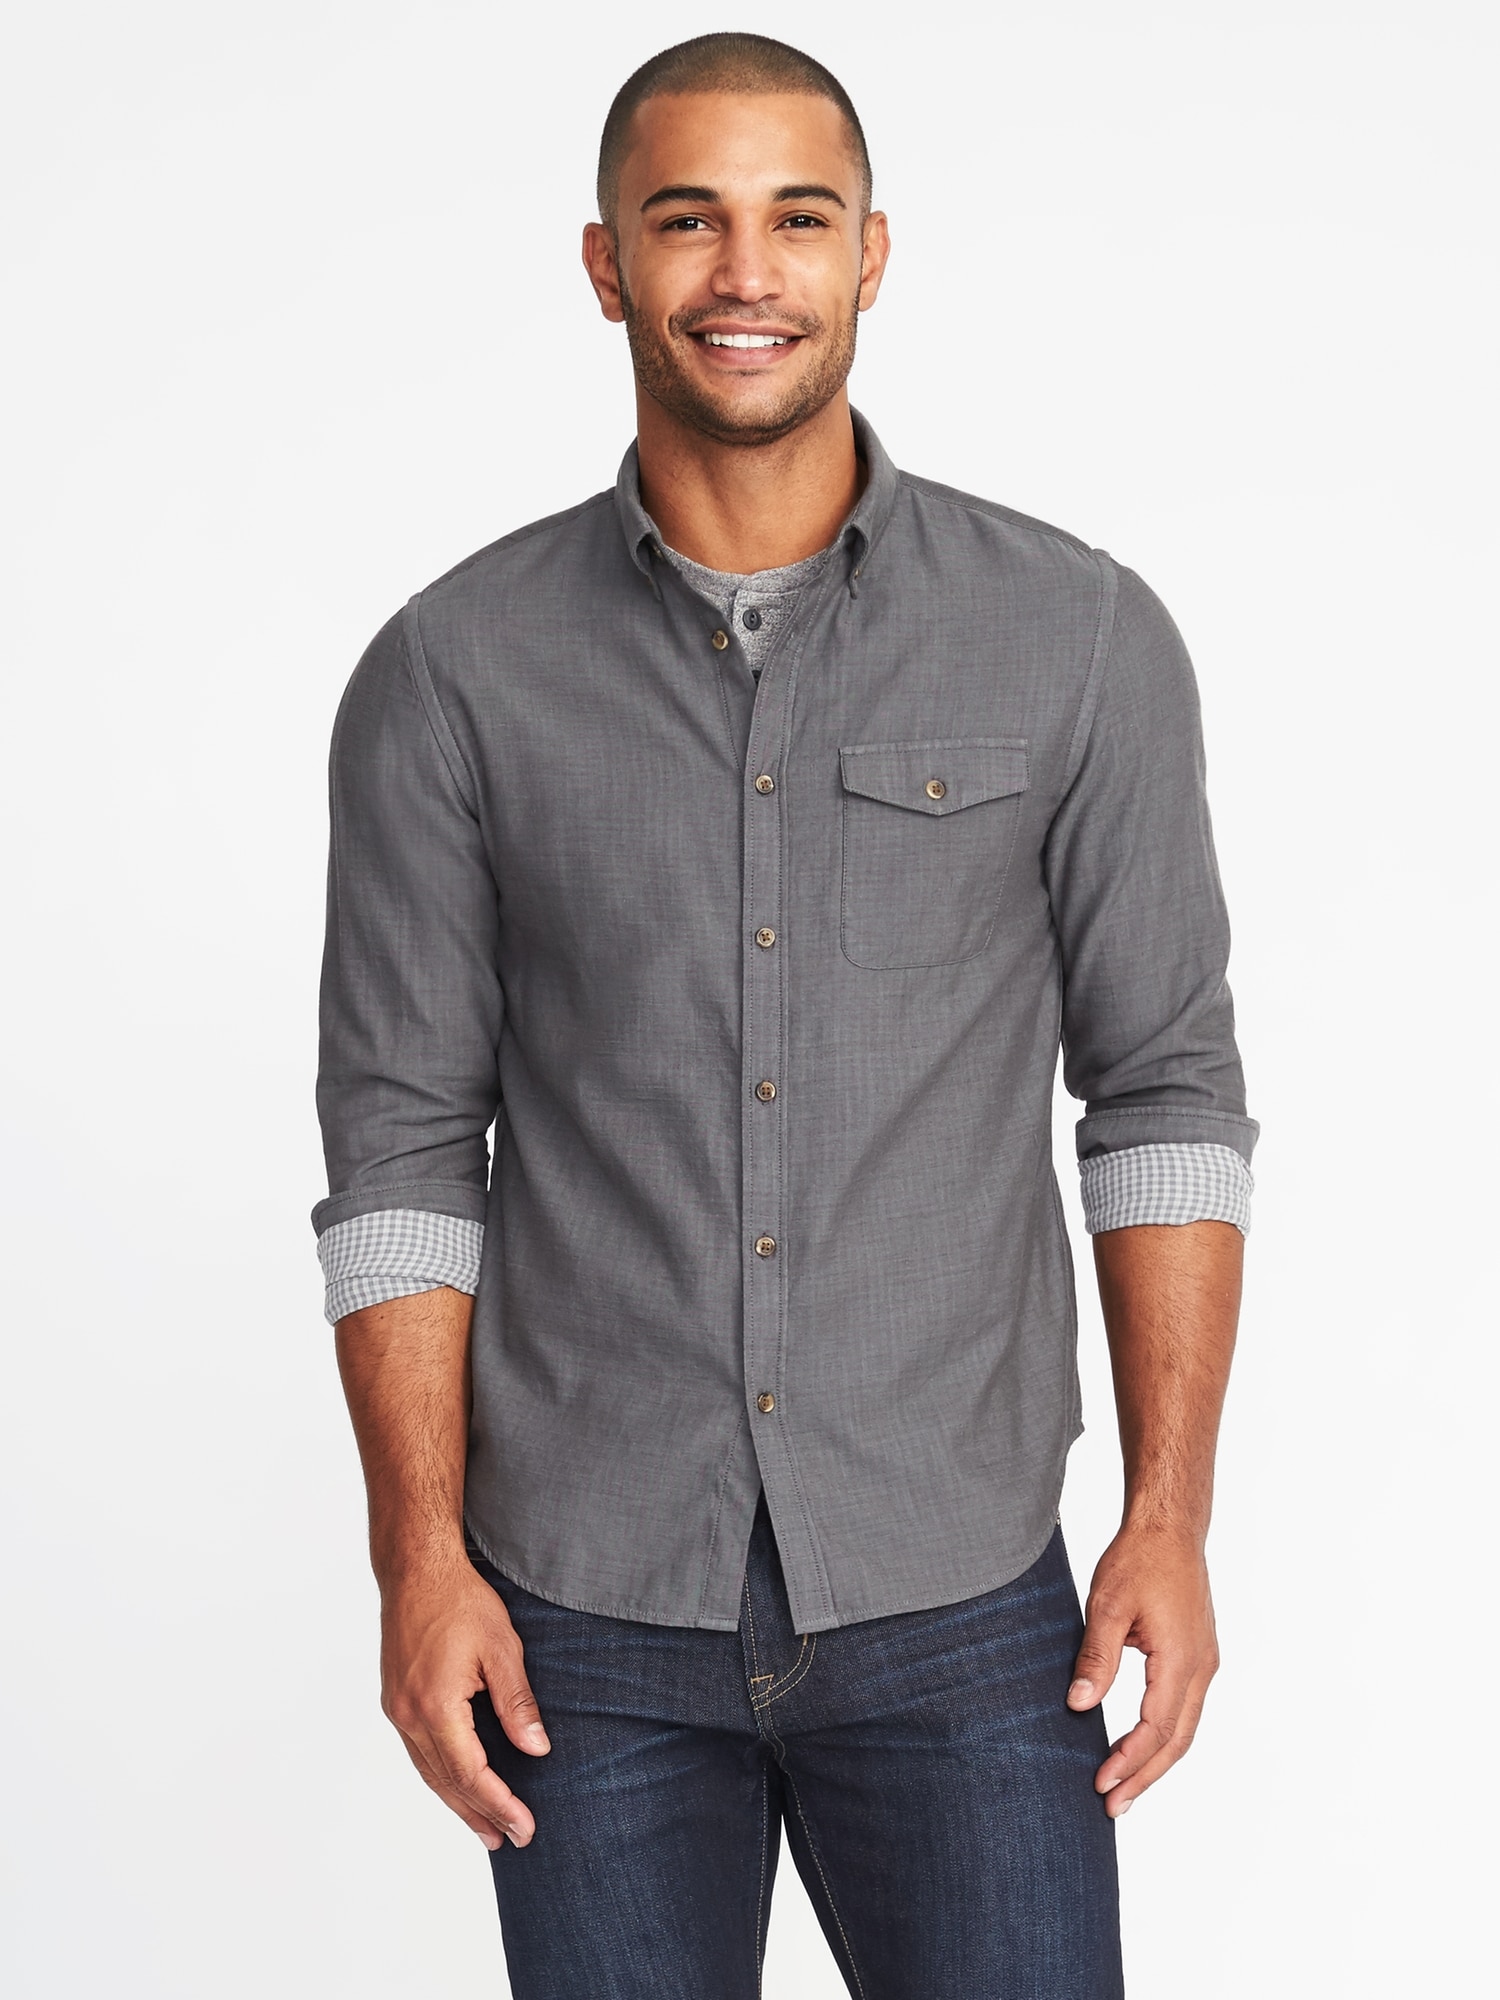 Slim-Fit Double-Weave Shirt for Men | Old Navy